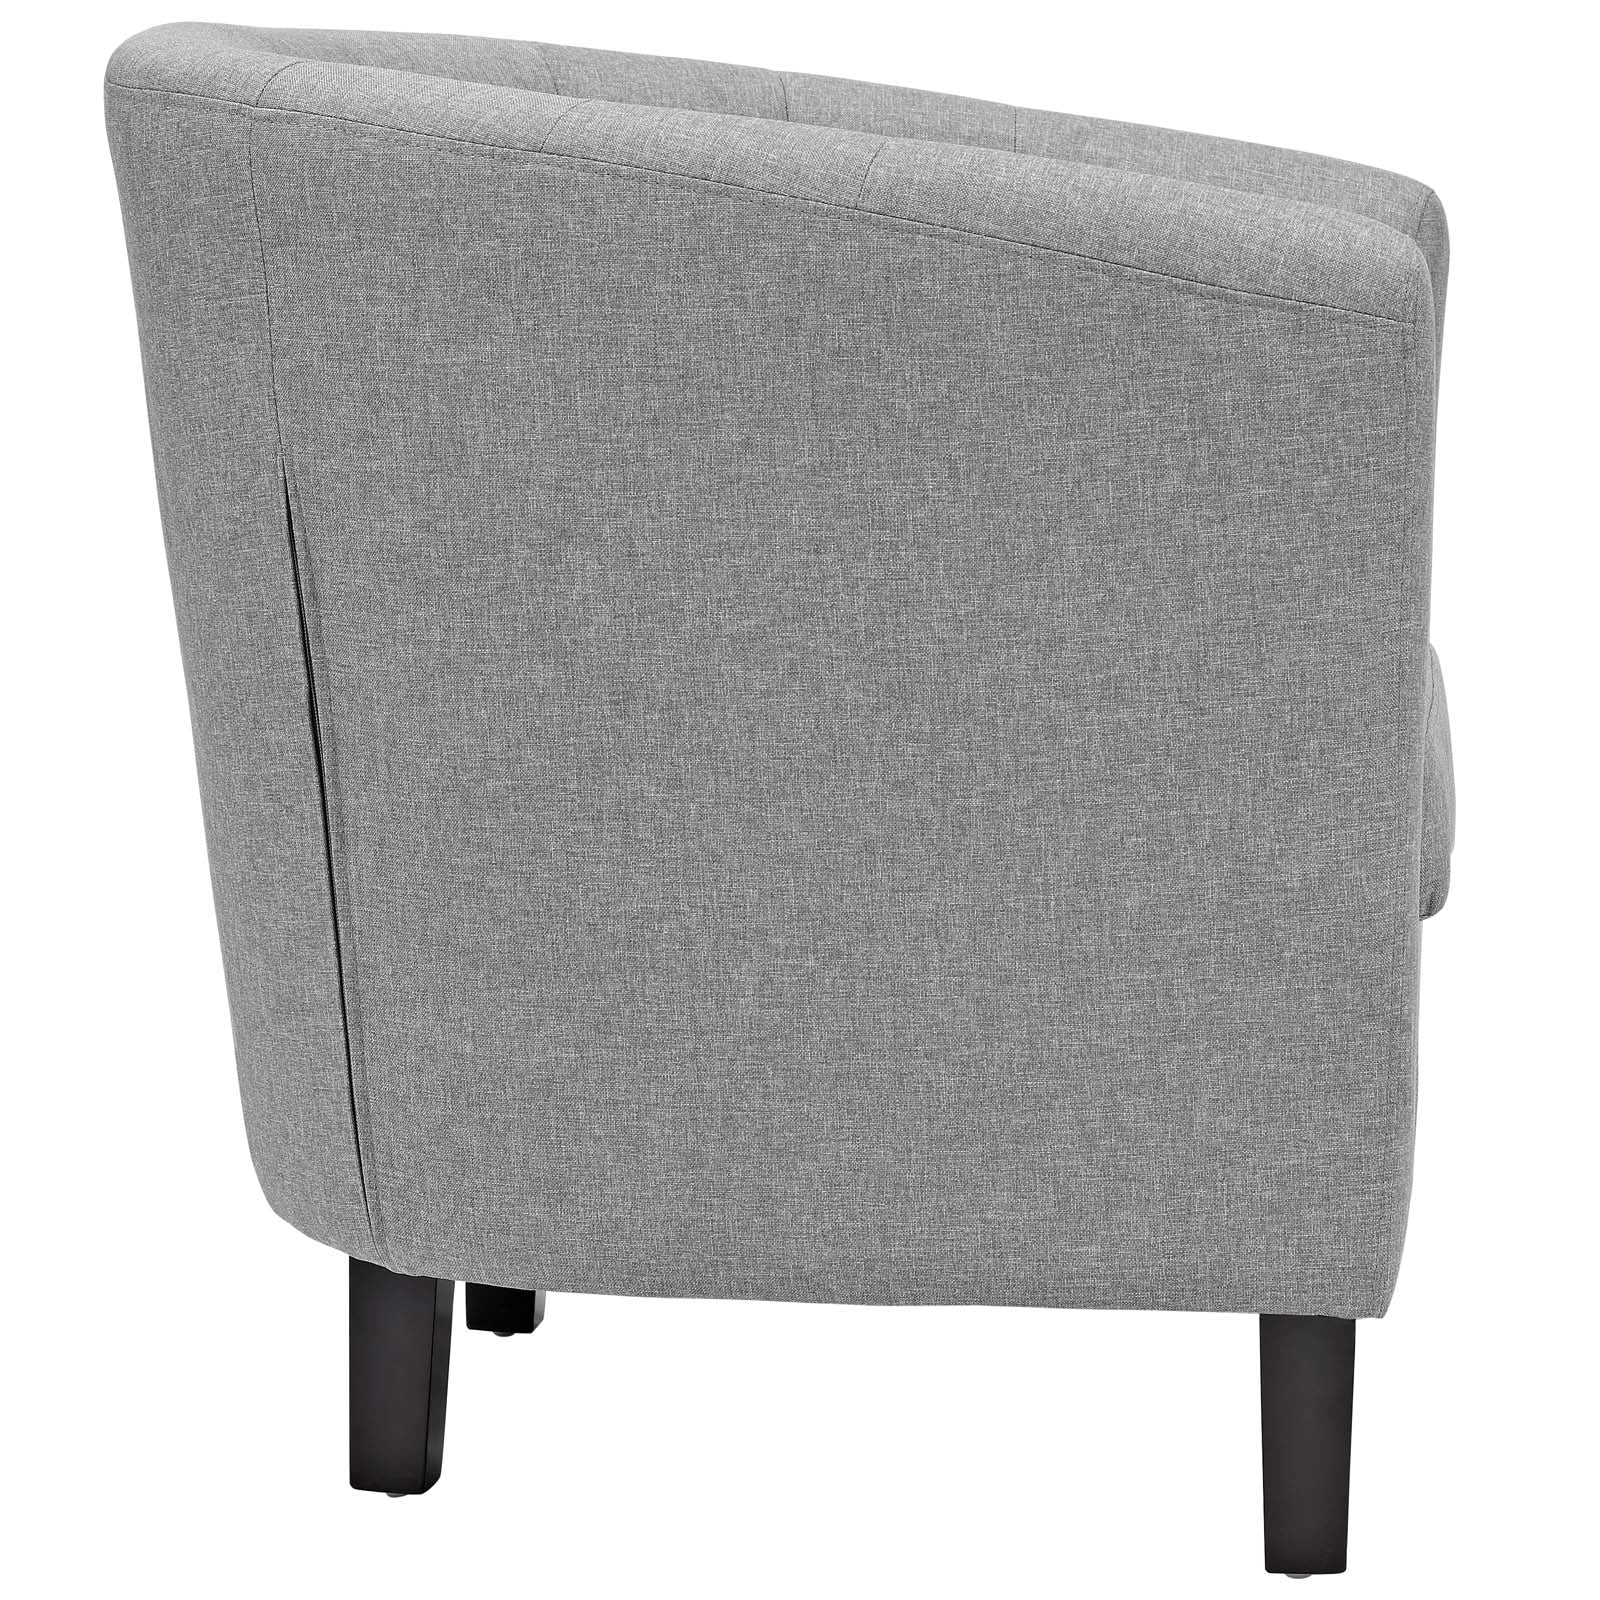 Modway Accent Chairs - Prospect 2 Piece Upholstered Fabric Armchair Set Light Gray